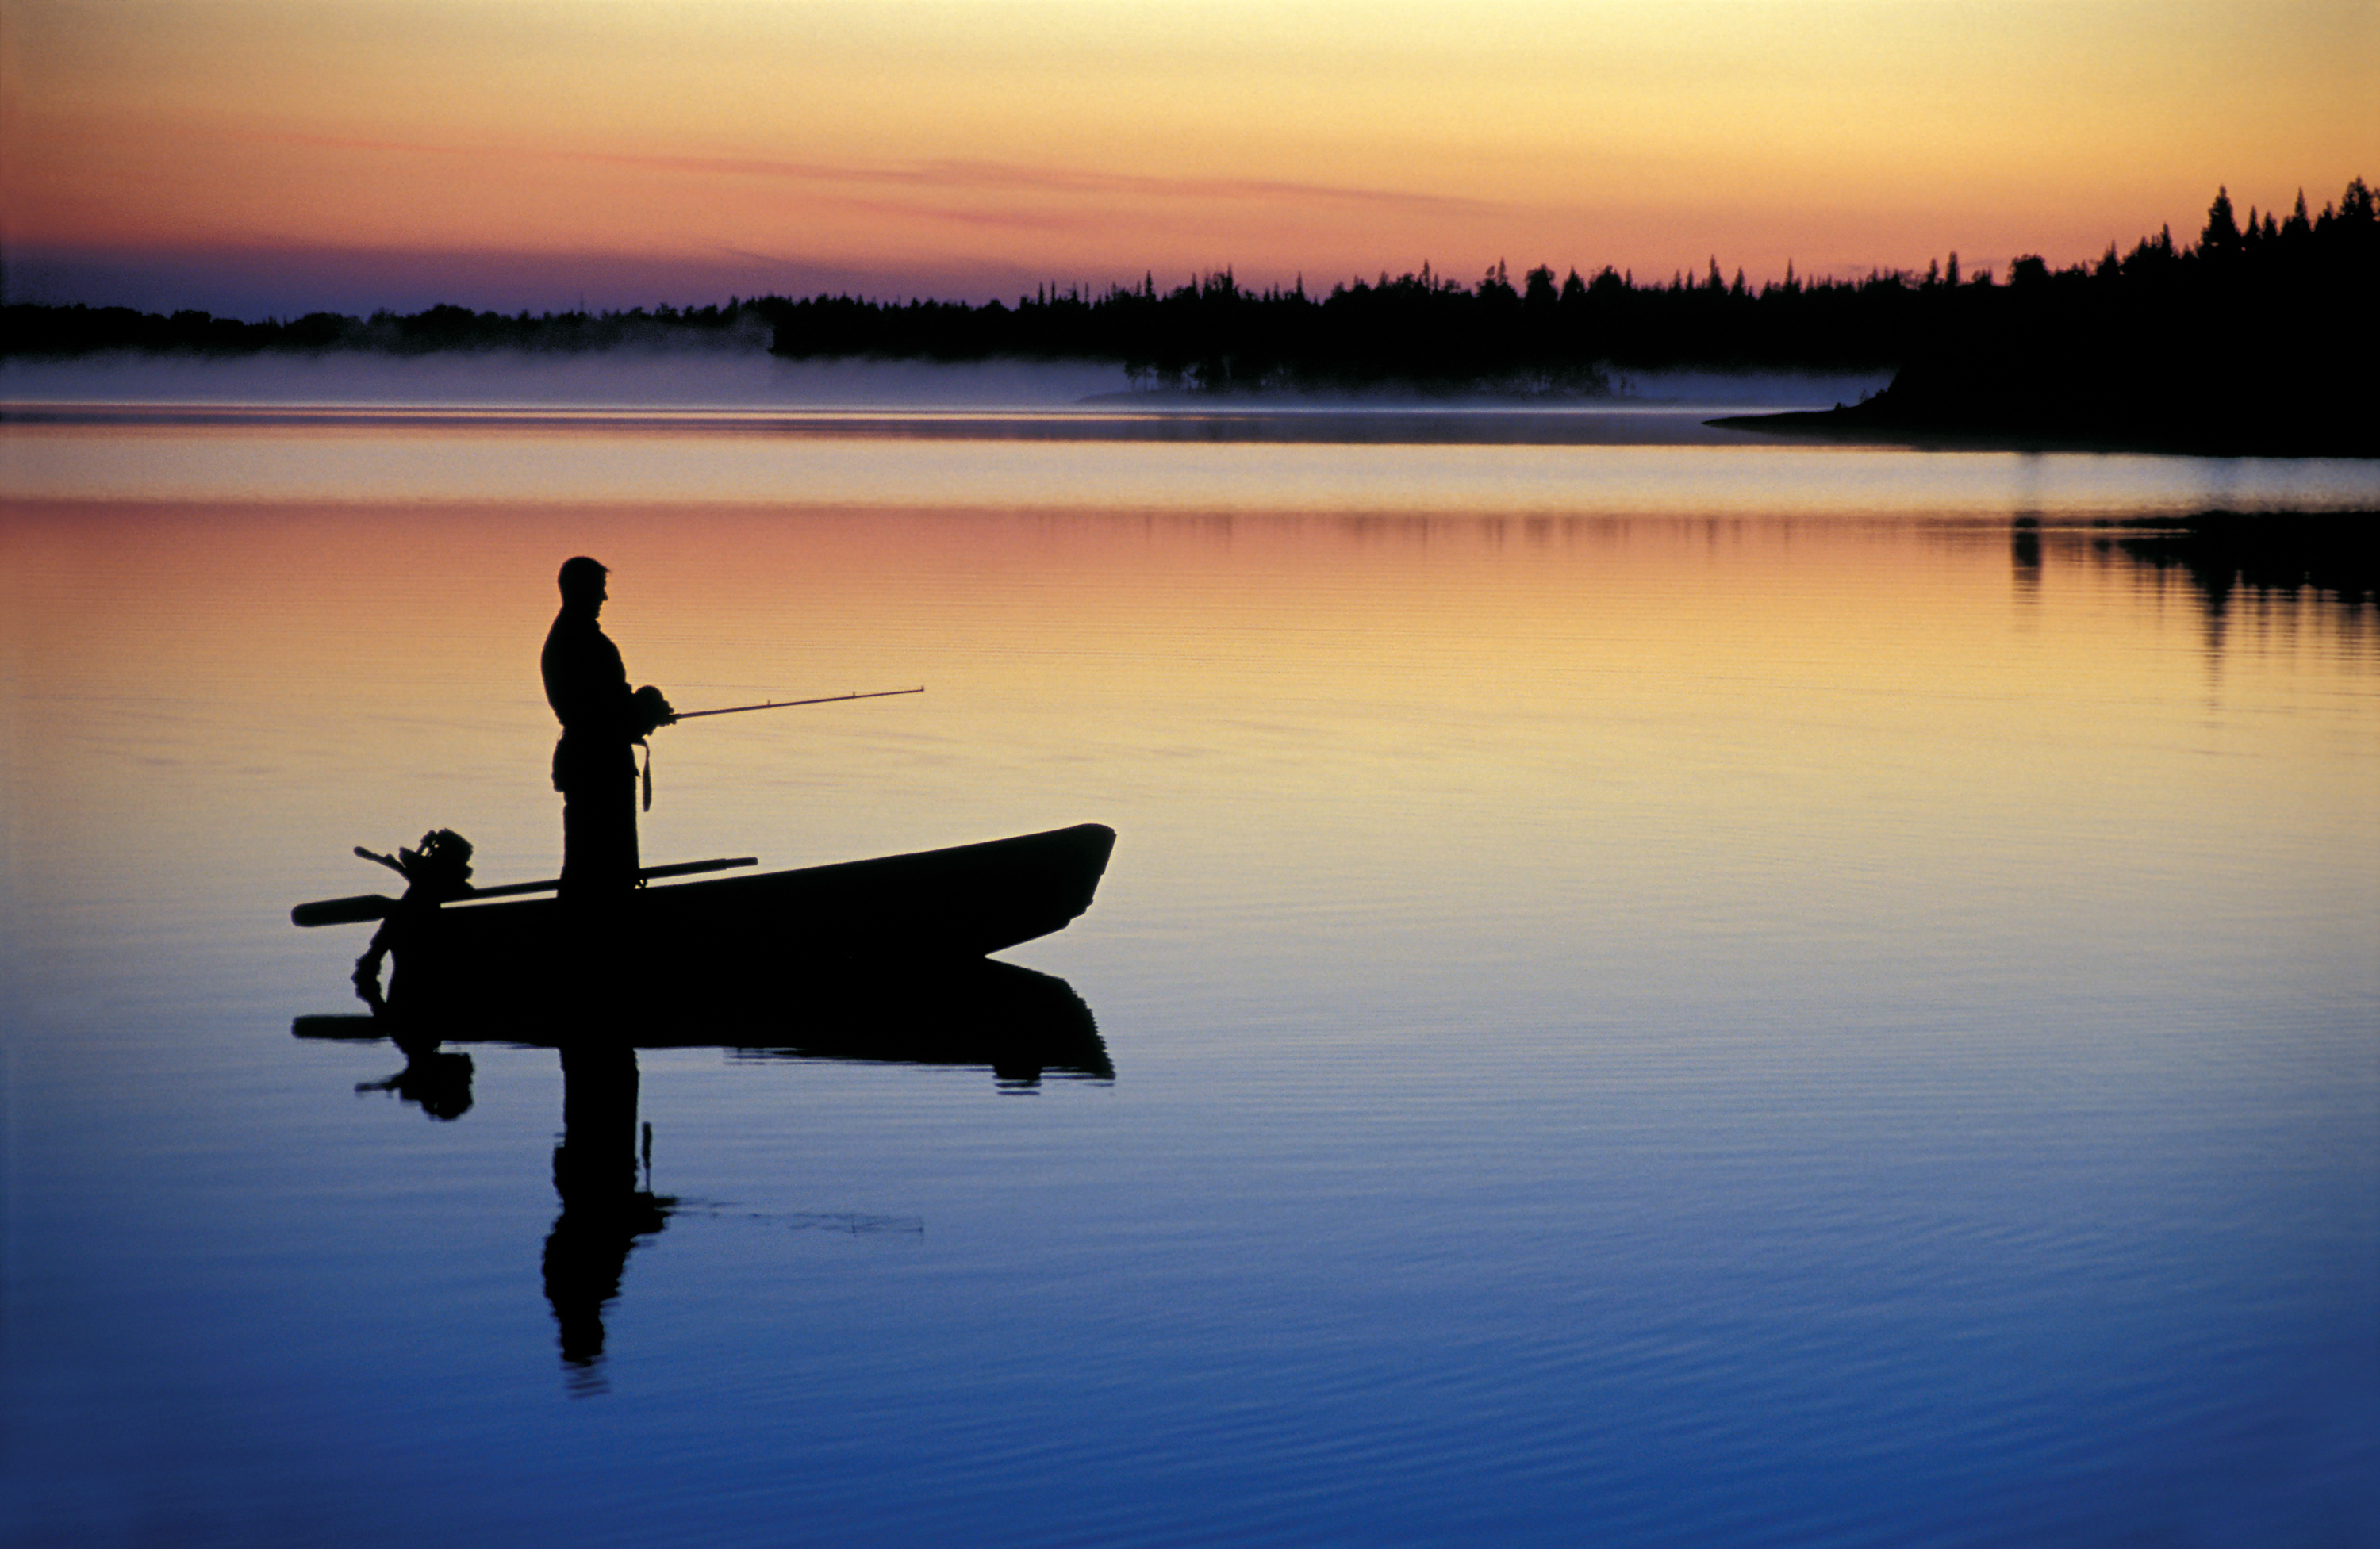 A silhouette of a person fishing on a boat, boater safety concept. 